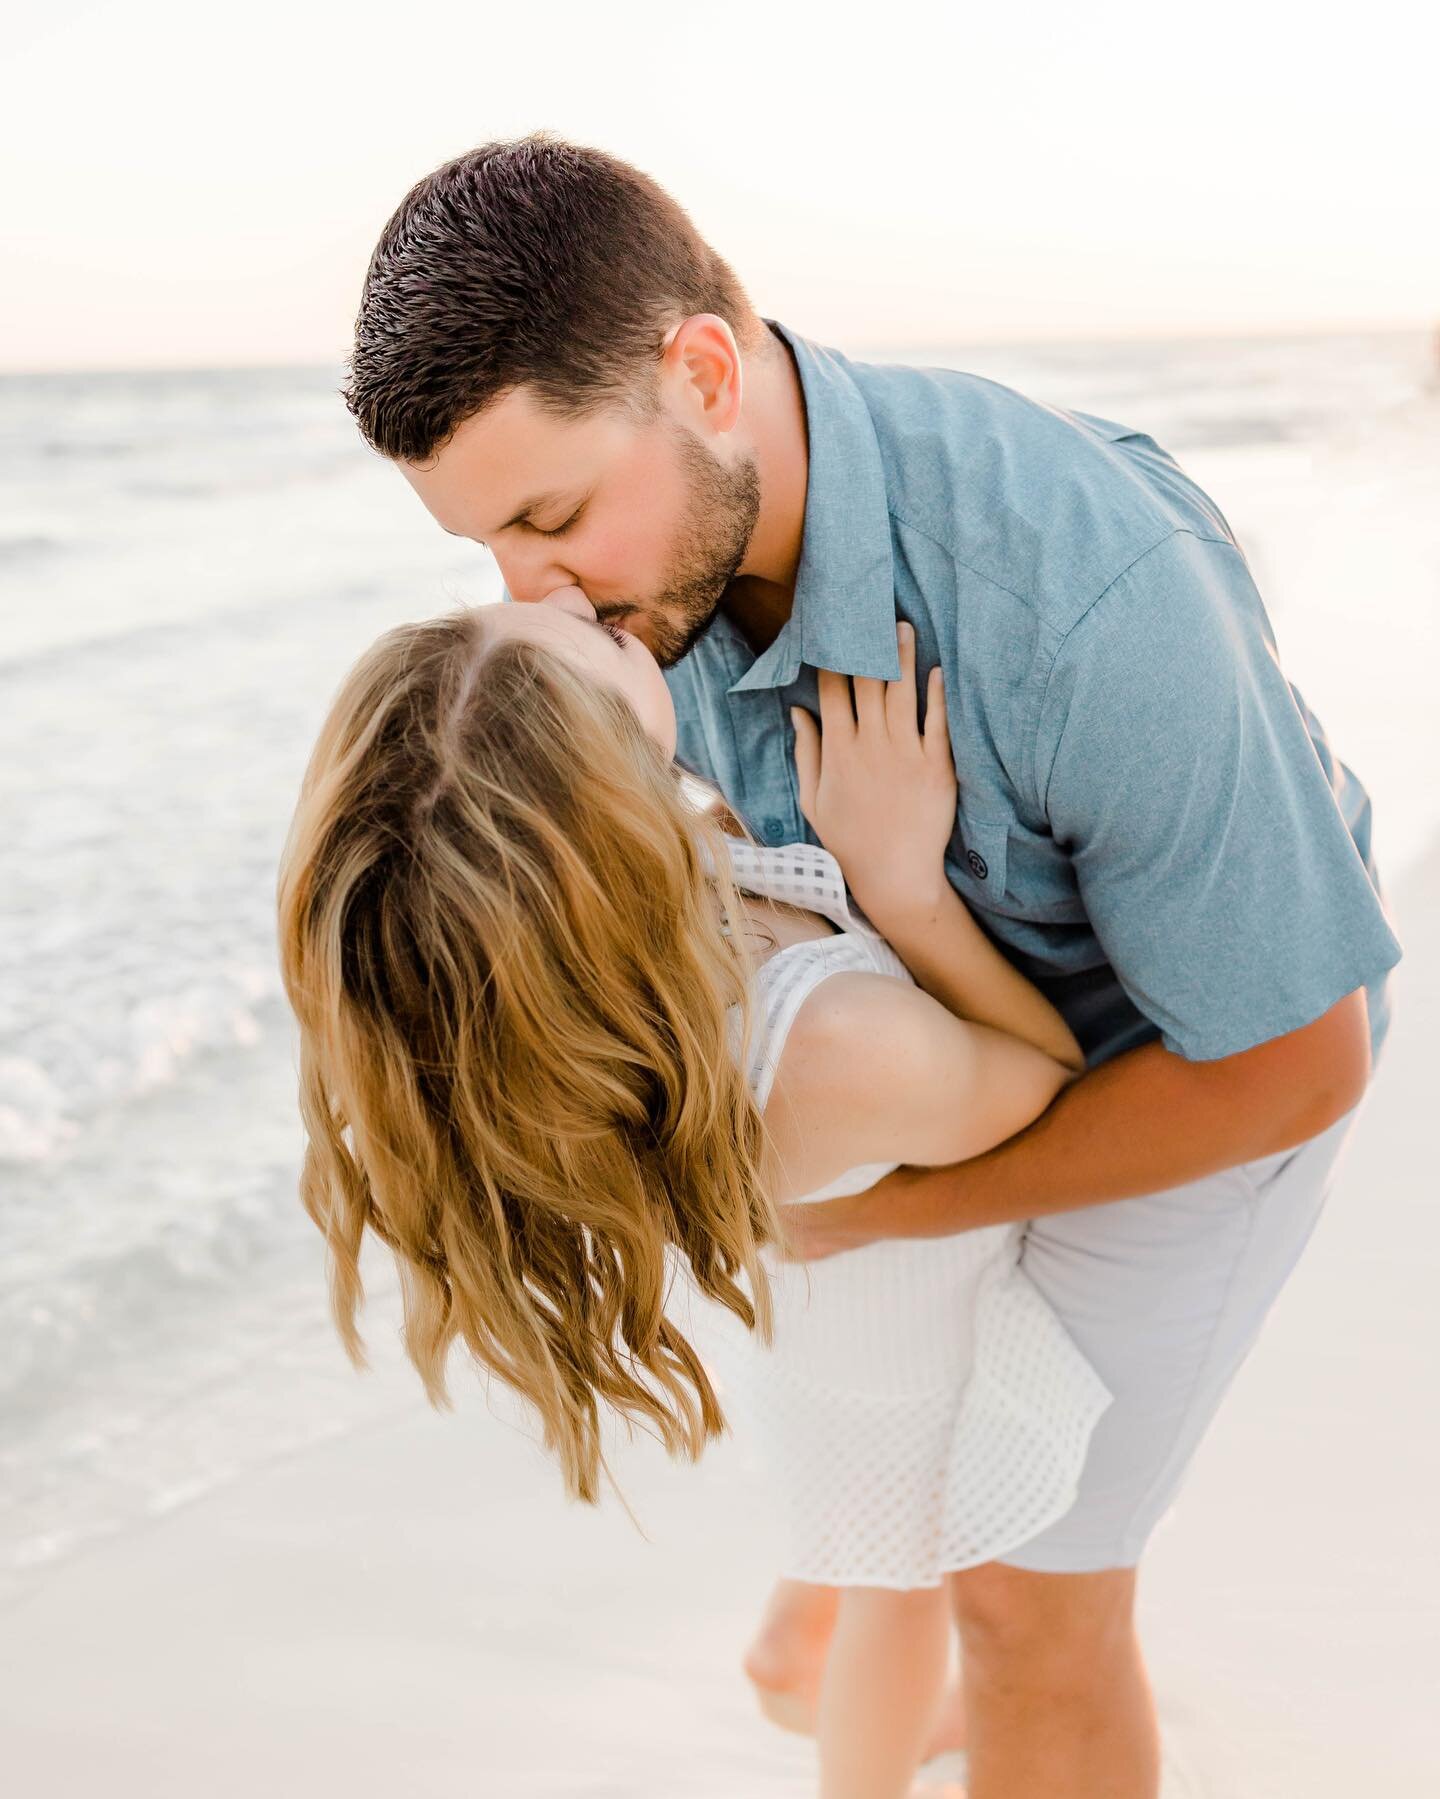 If I don&rsquo;t say it enough, I love my job 💙 Summer season is filling up so quickly! If you want a date, message soon! Can&rsquo;t wait to meet all of you this summer!

#rosemarybeachphotographer #maternityshoot #30afamilyphotographer #graytonbea